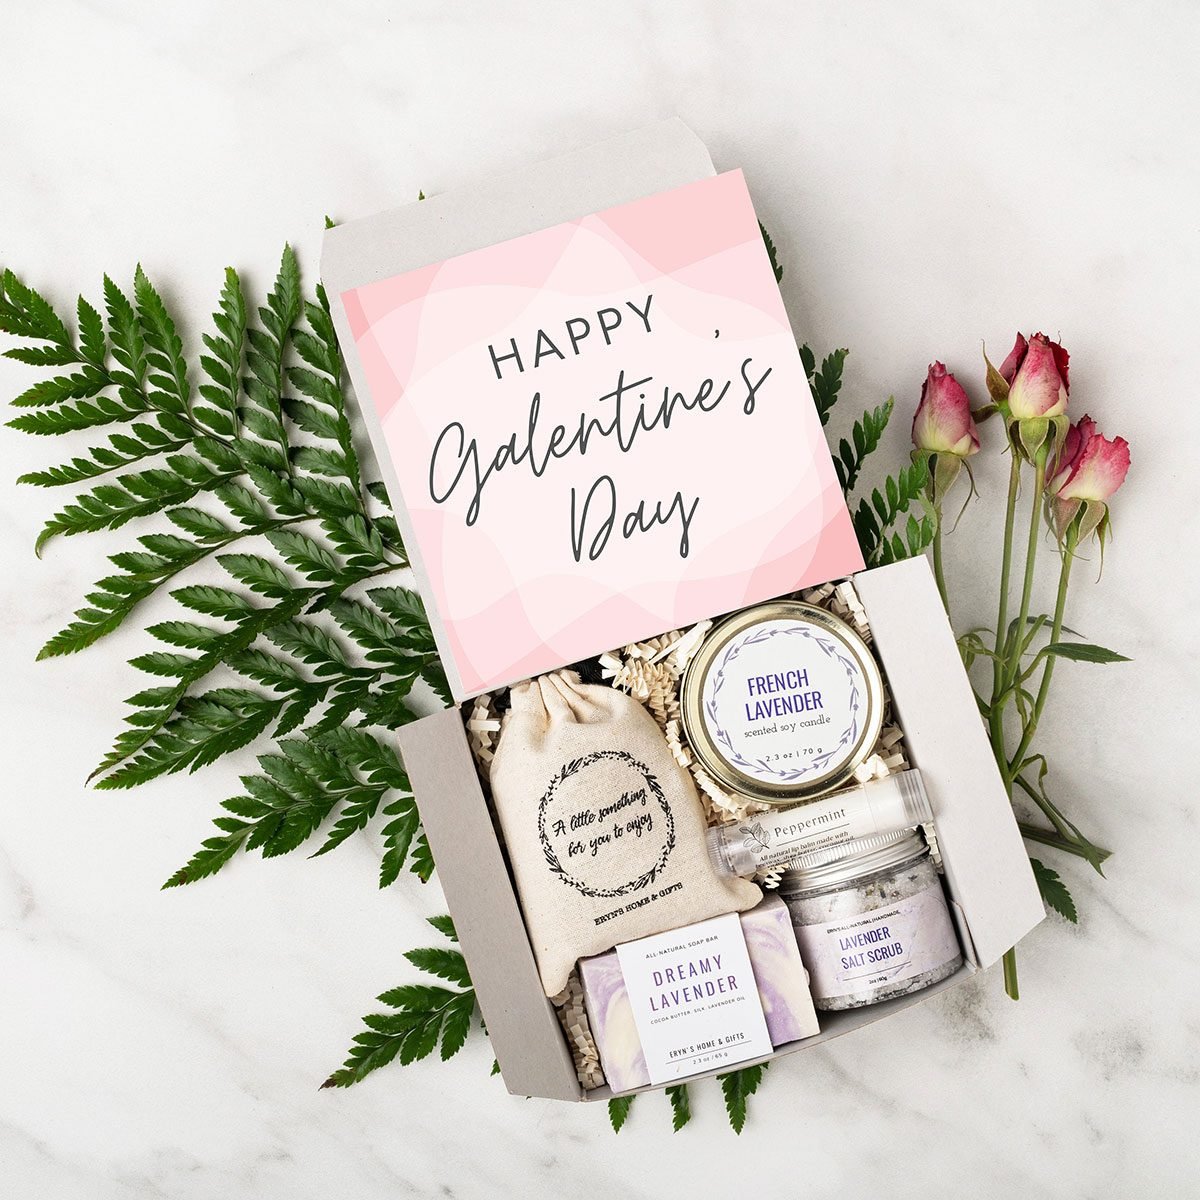 Your One-Stop Shop For Galentine's Day Gifts